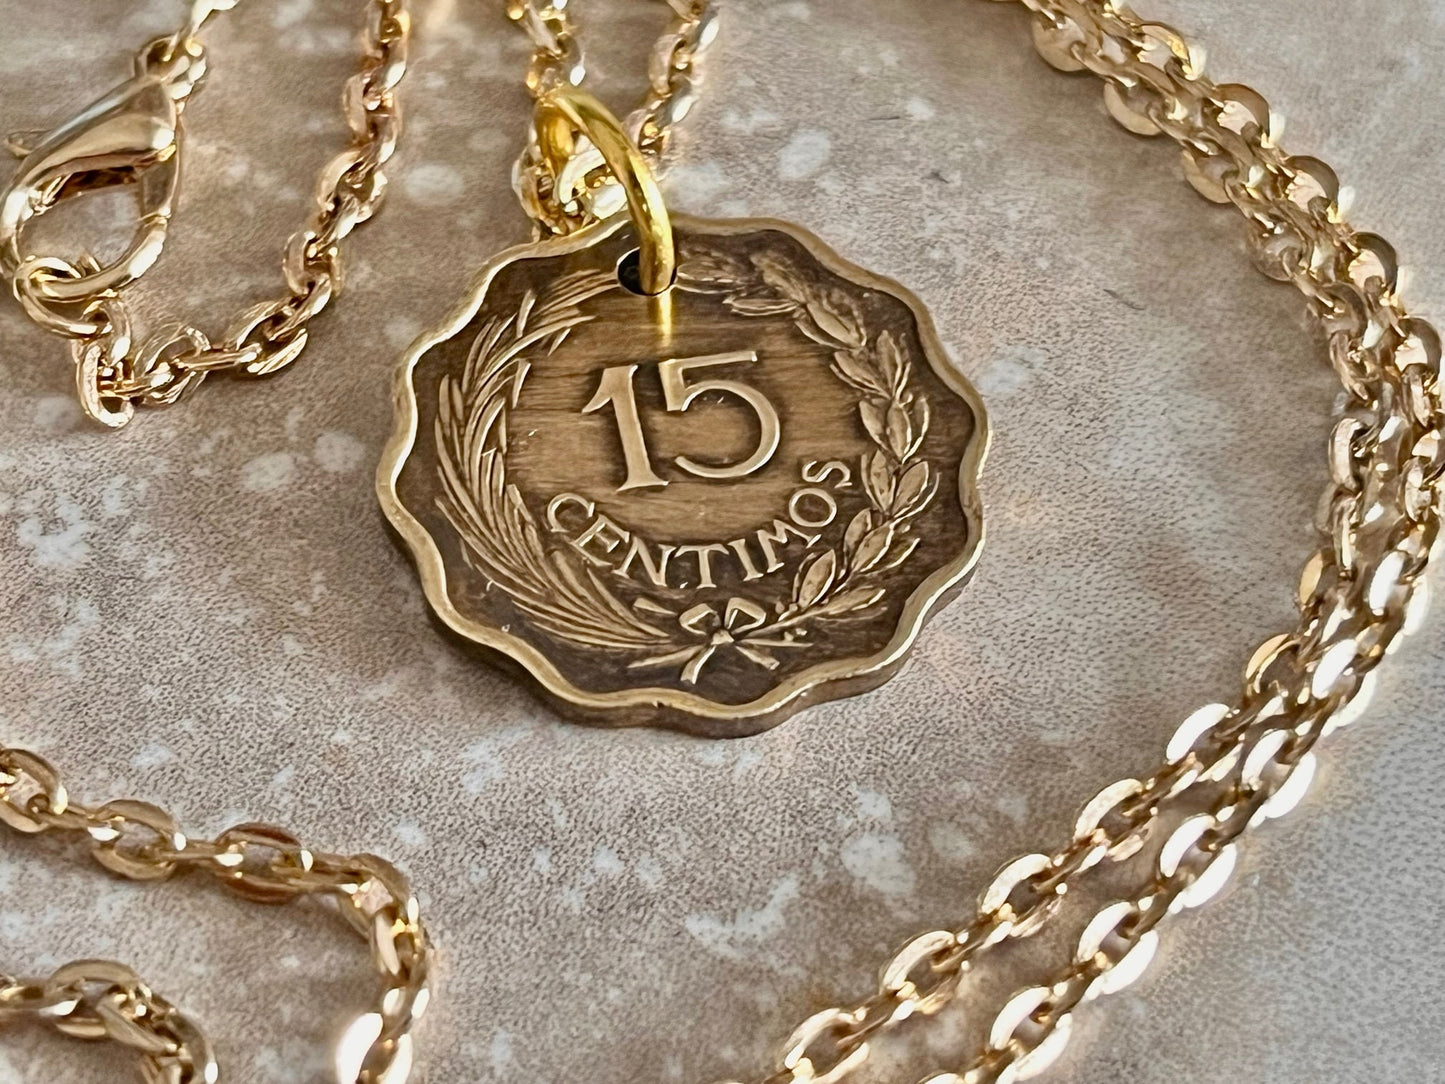 Paraguay Coin Necklace Pendant 15 Centimos Personal Handmade Jewelry Gift Friend Charm For Him Her World Coin Collector